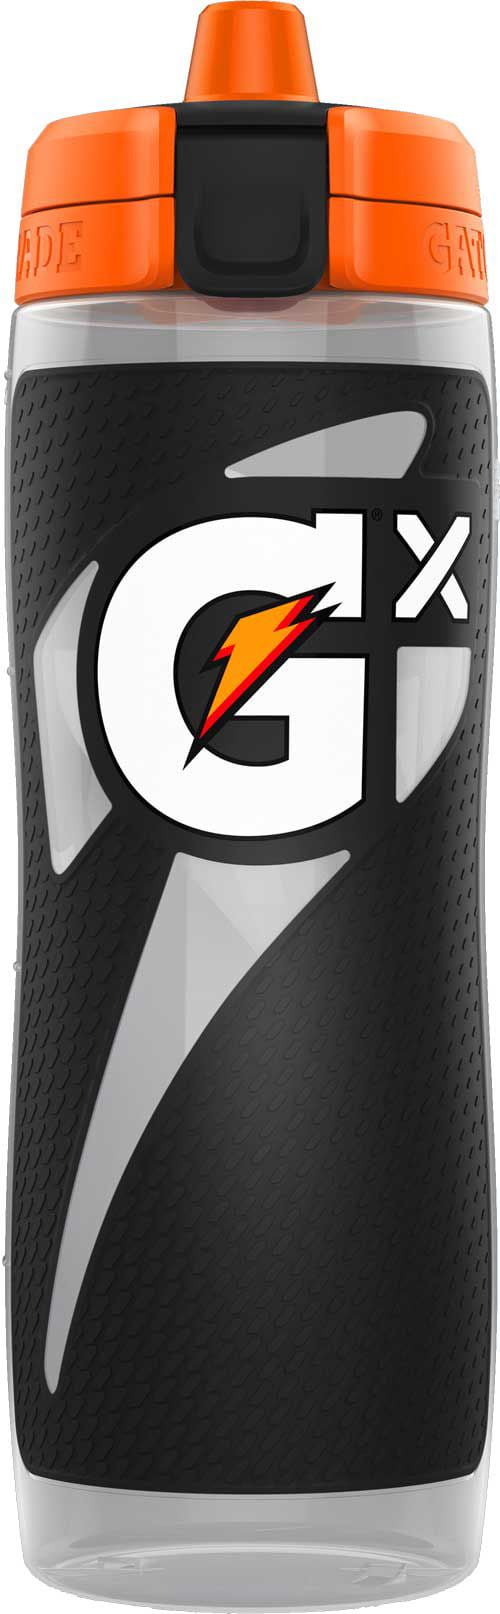 and Colors IN HAND NEW READY TO SHIP Gatorade GX Bottle 30 oz Rare Black White